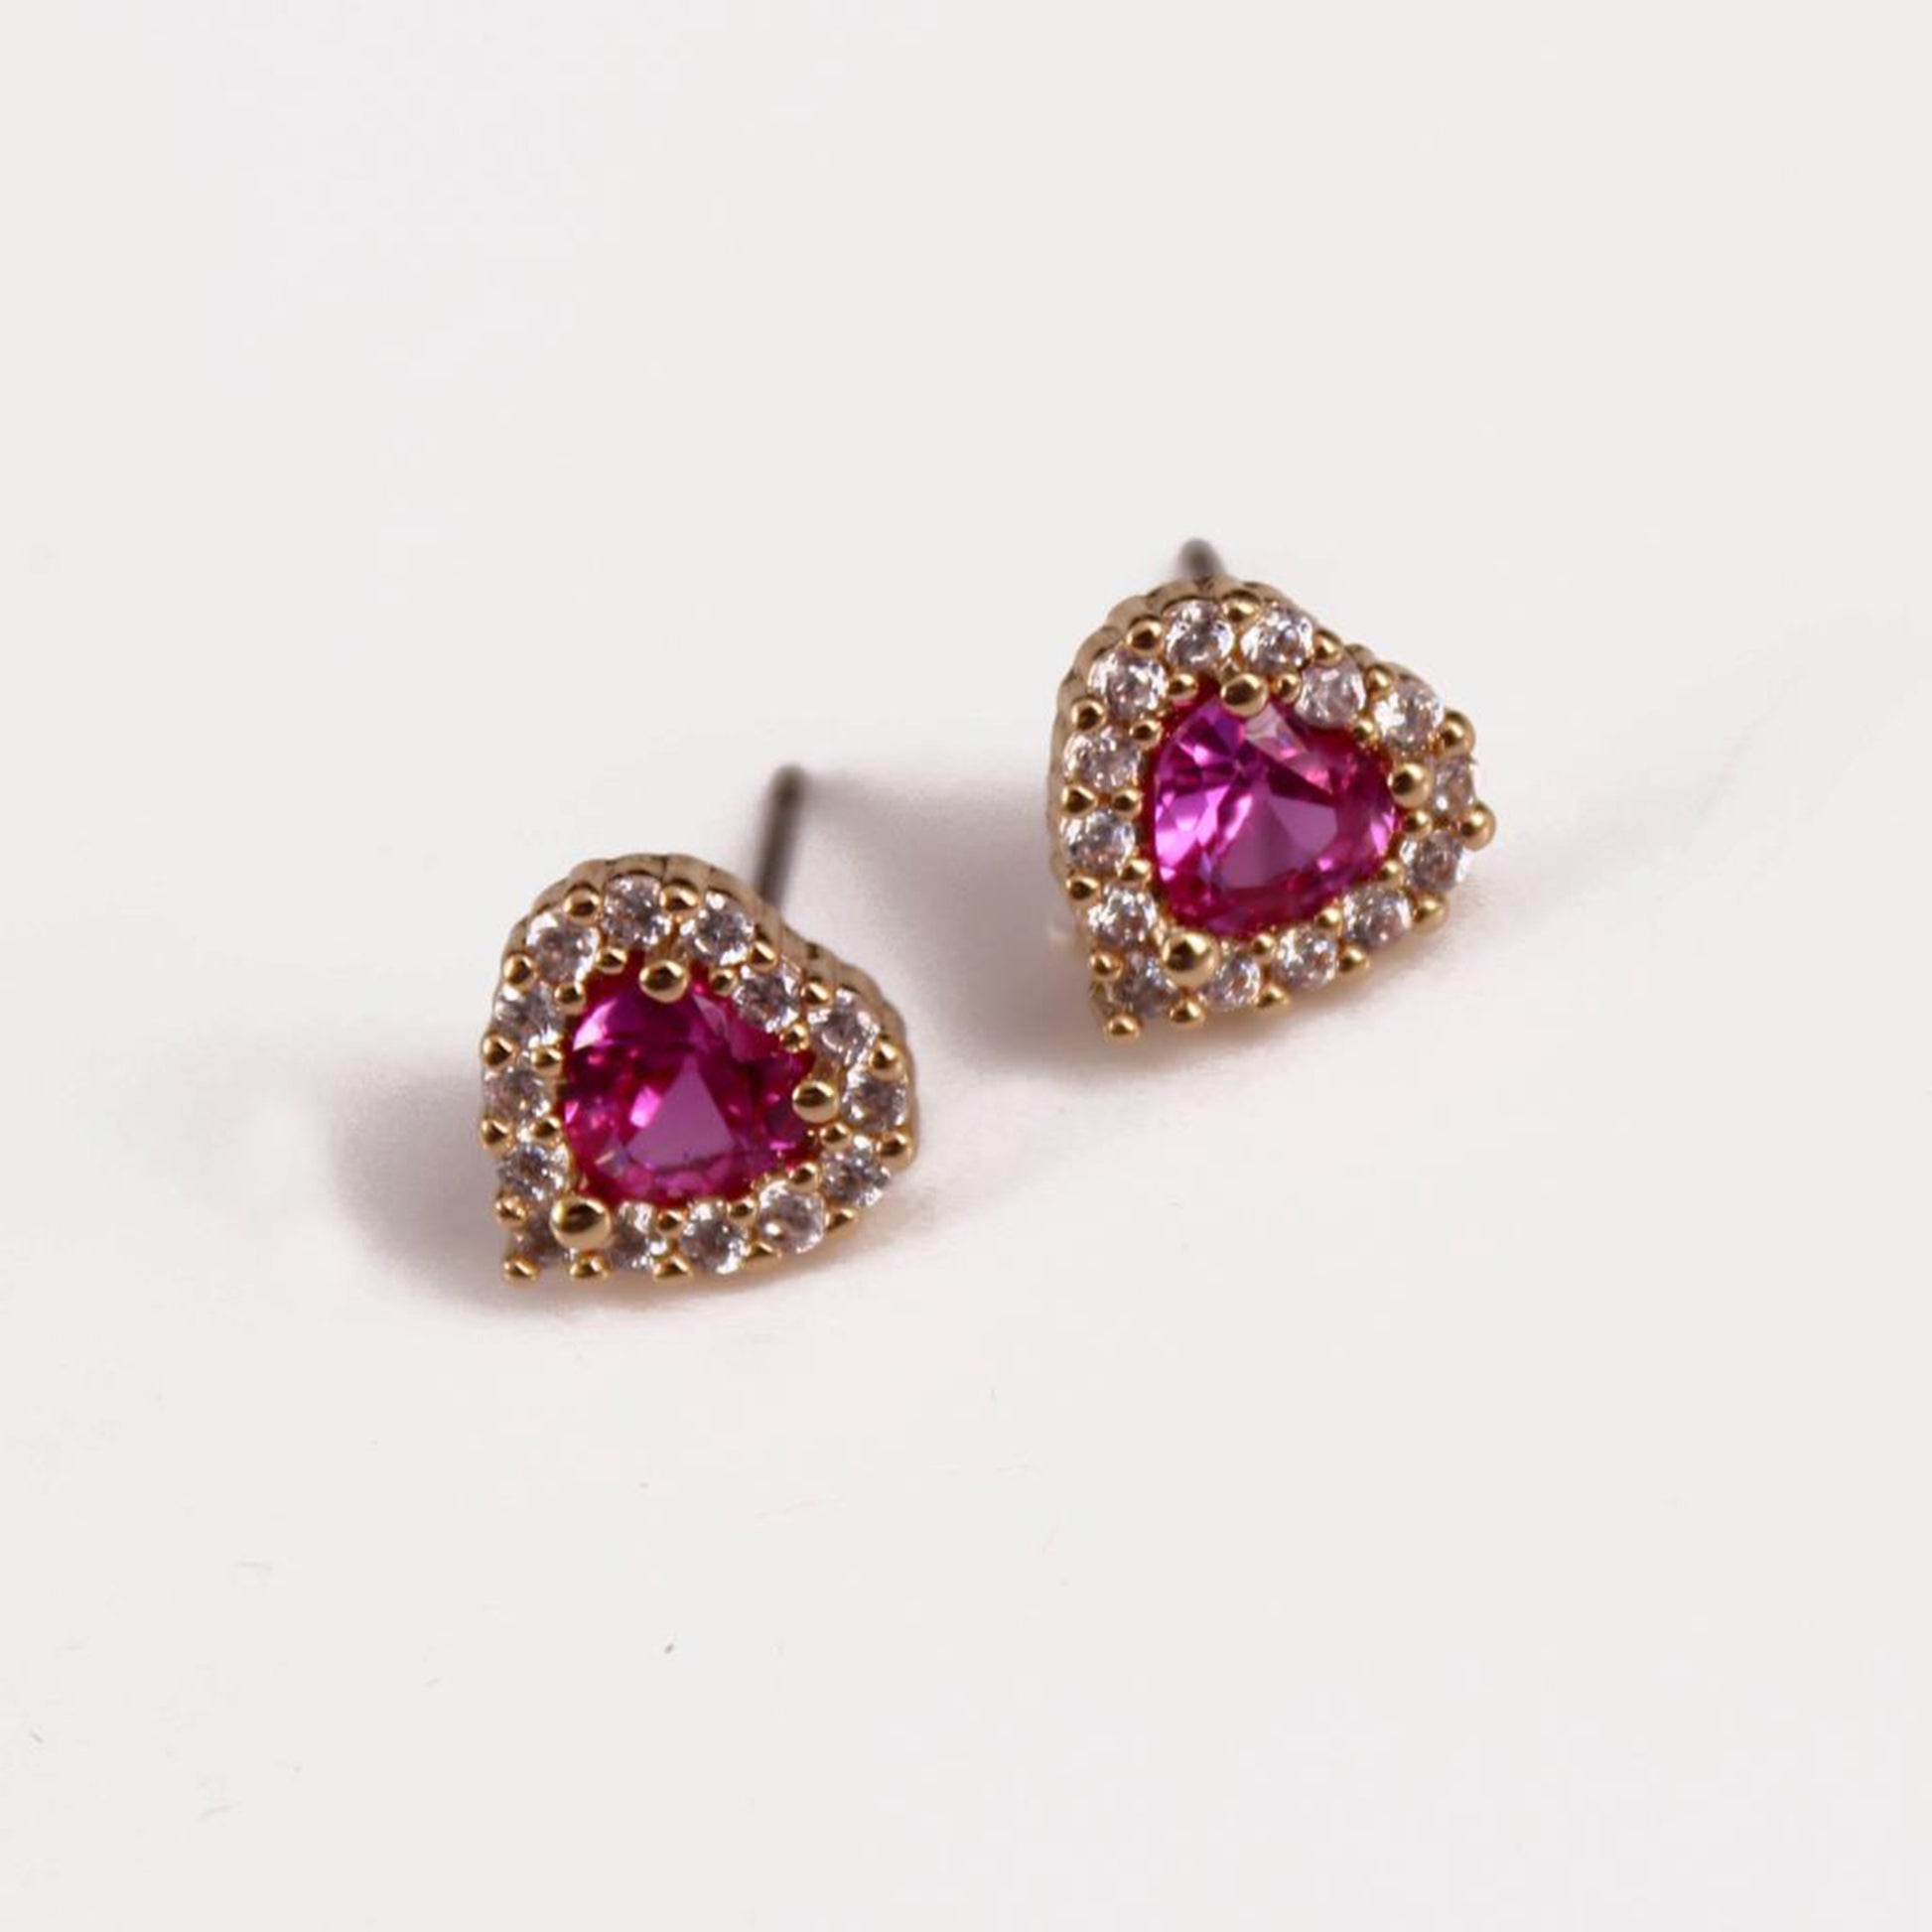 heart stud earrings with cubic zirconia stones in pink and clear 